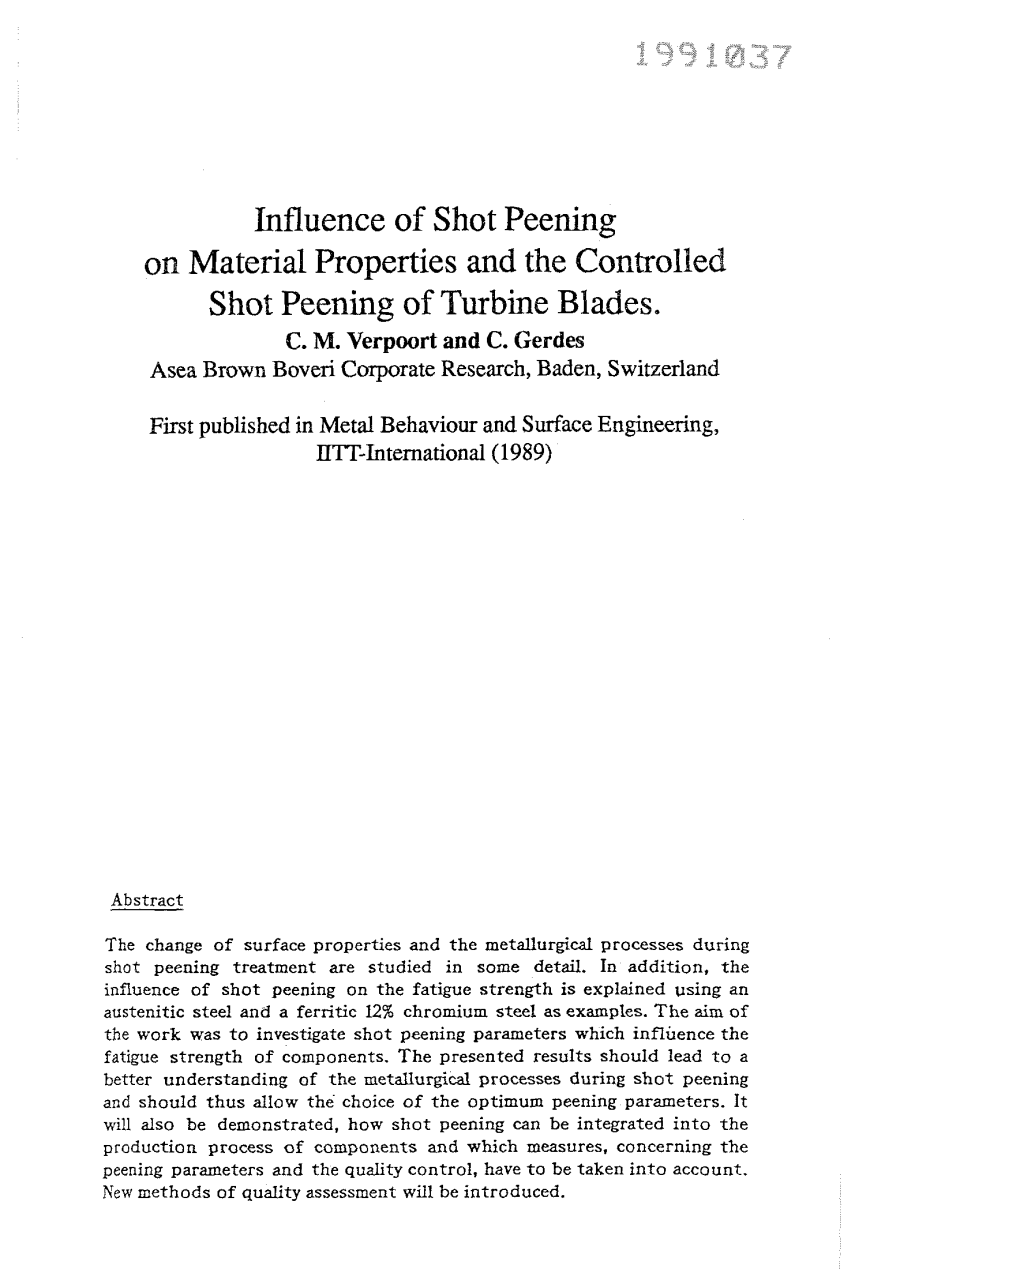 Influence of Shot Peening on Material Properties and the Controlle Shot Peening of Turbine Blades